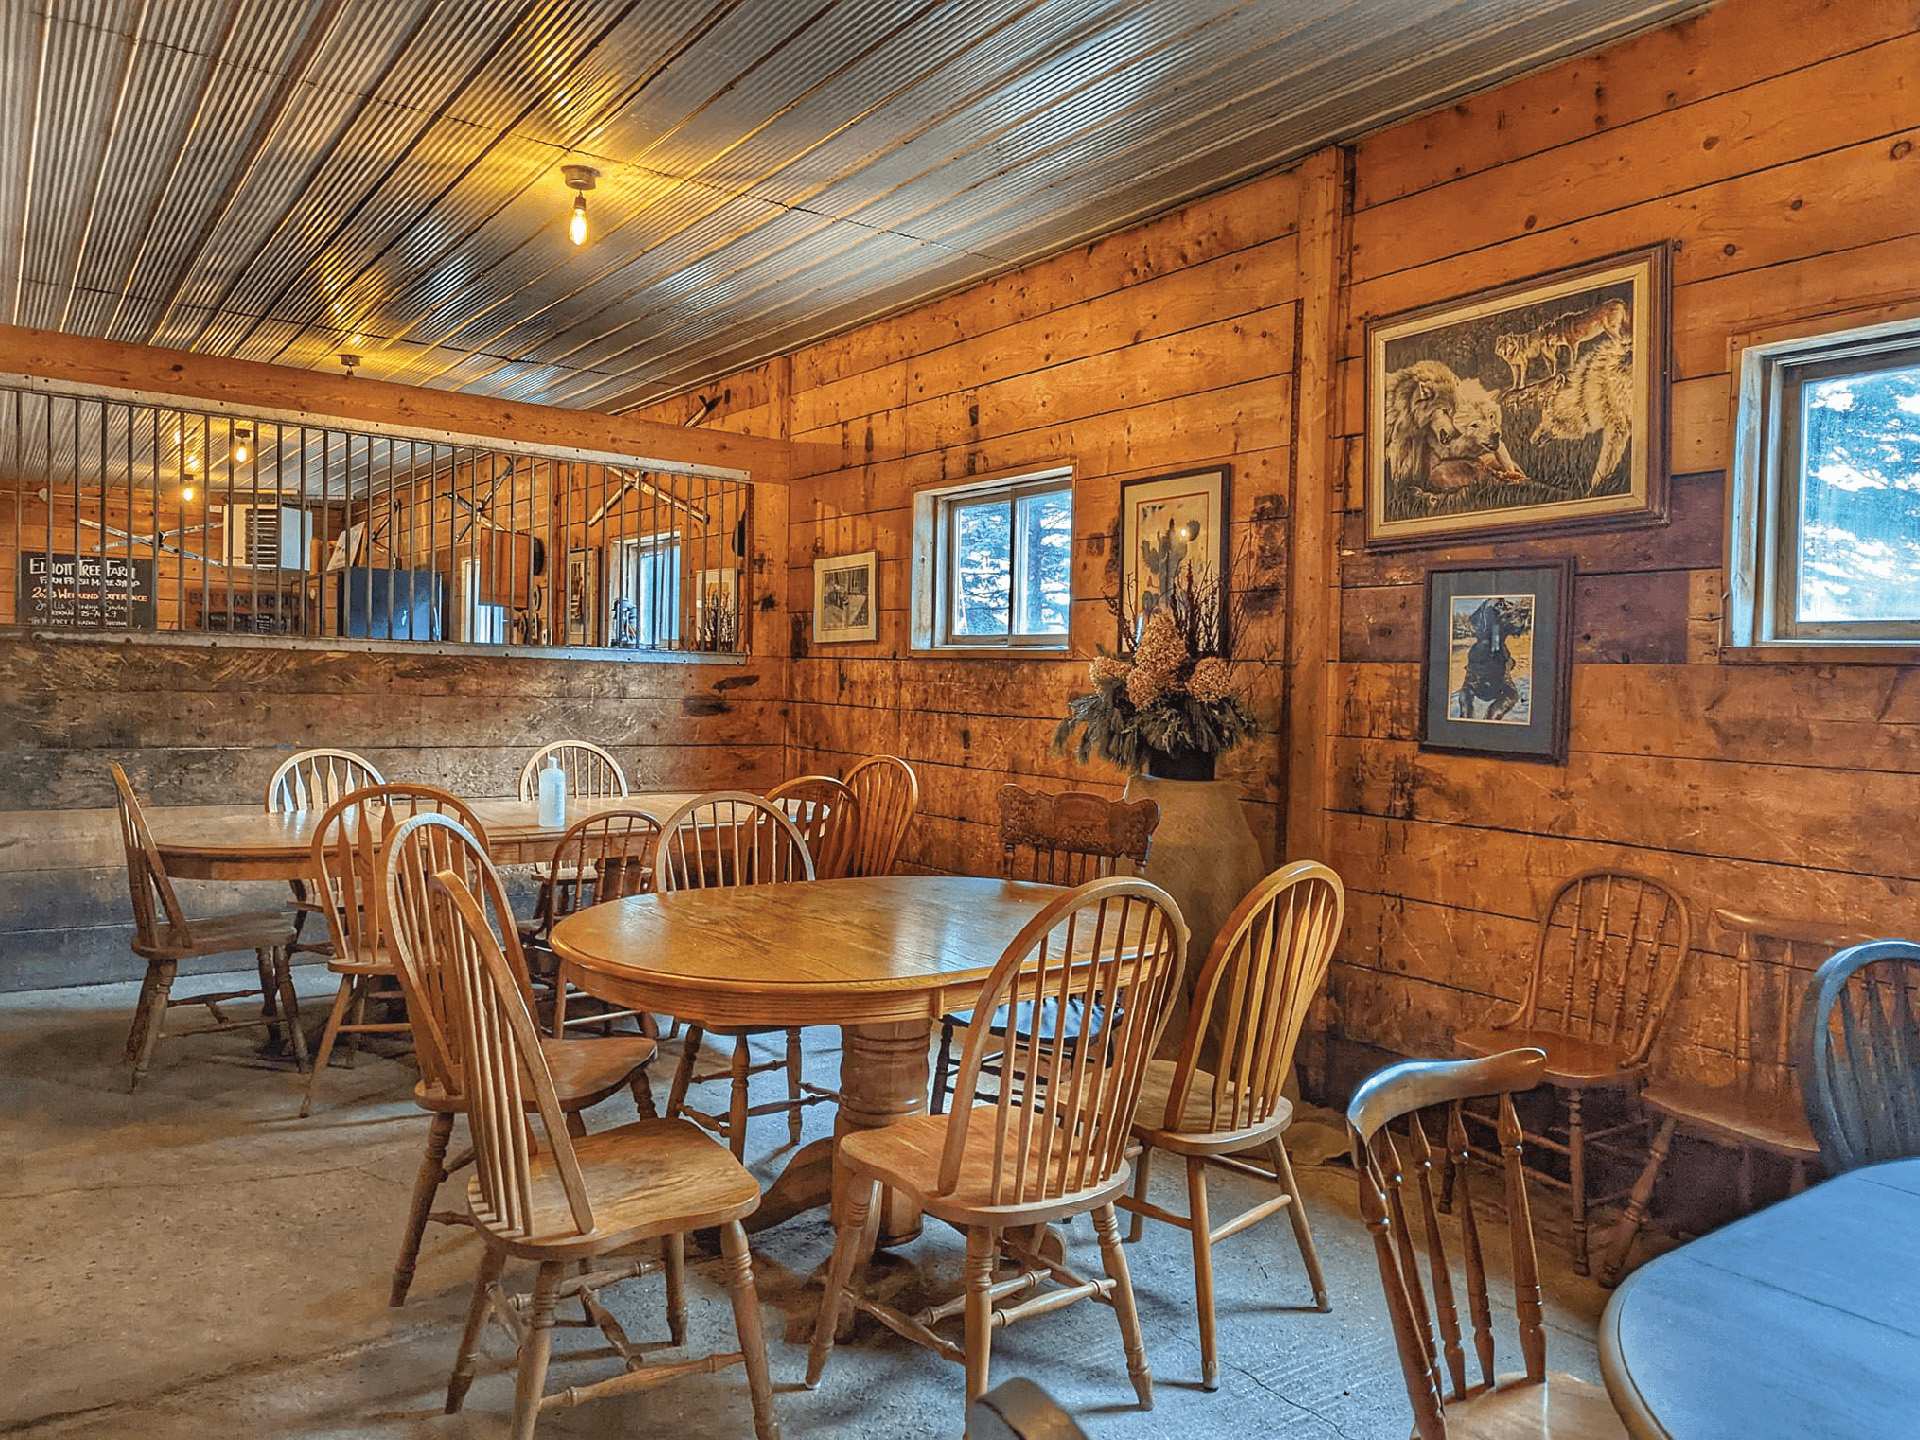 Rural Route Tour Co. maple syrup farm tour | The rustic dining room at Horse Barn Canteen